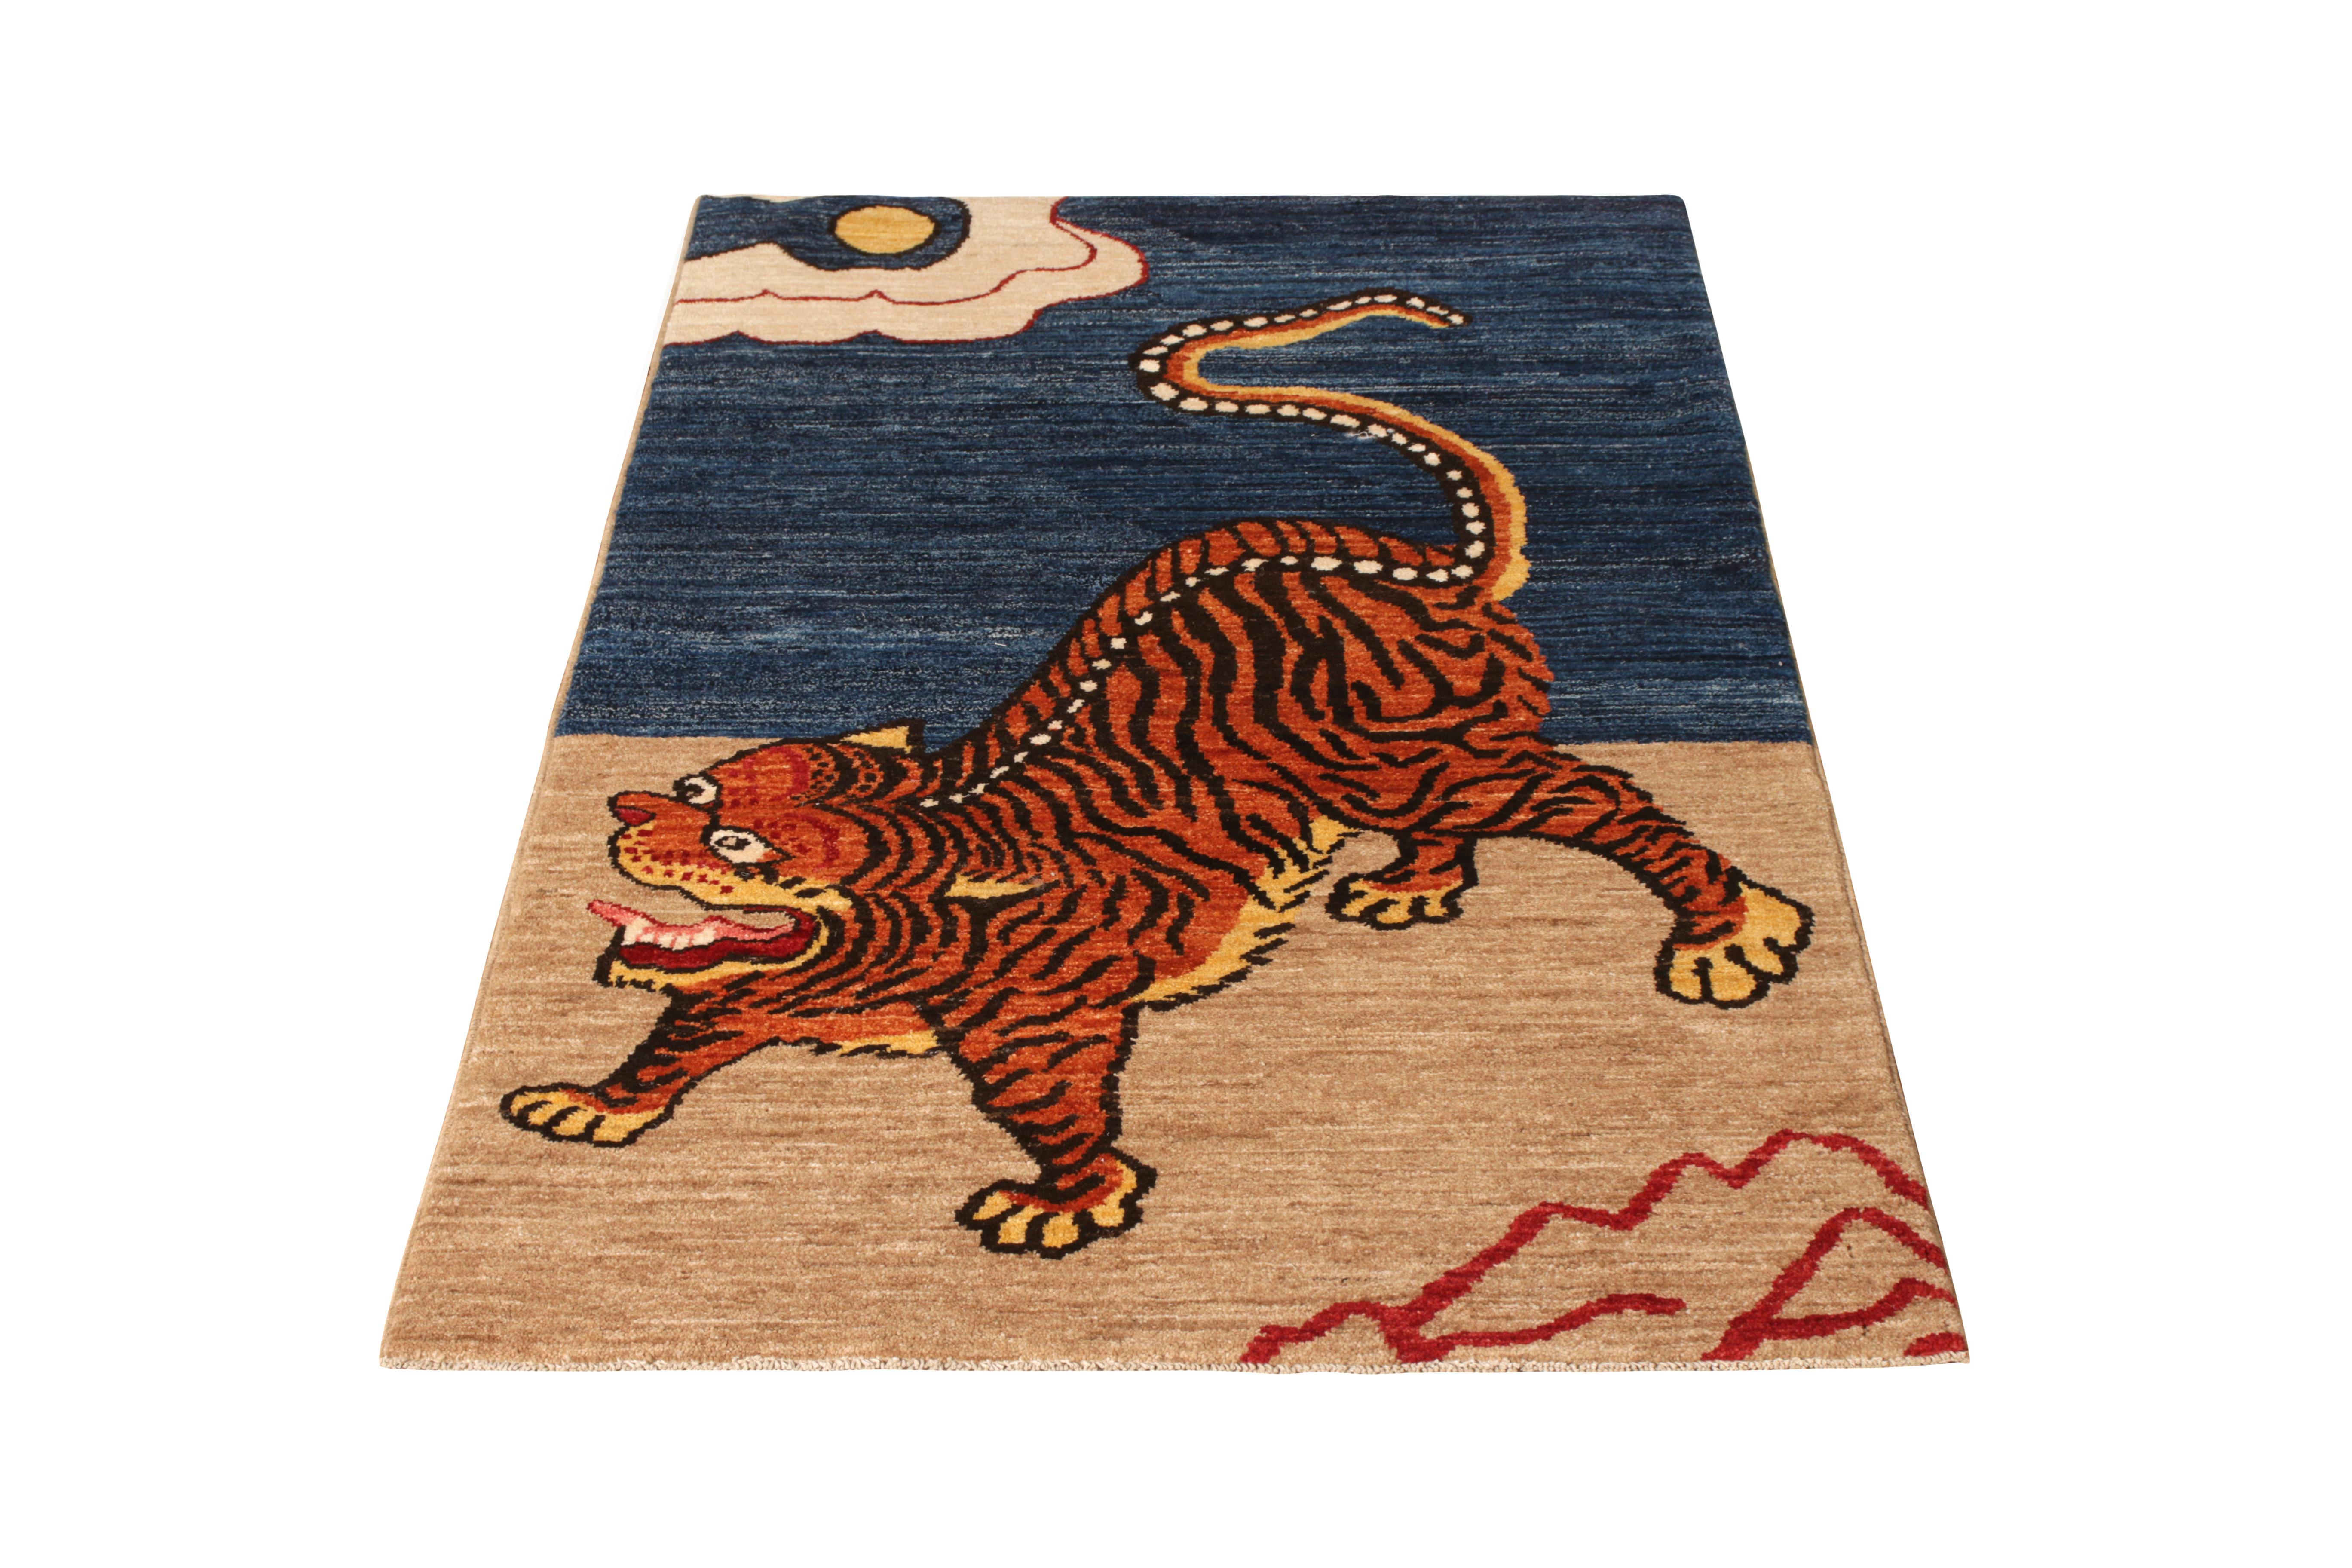 A 3 x 6 ode to celebrated Mongolian Tiger rug styles, from the latest collection by Rug & Kilim. Hand knotted in wool, depicting a twisting tiger in orange and black beneath the meeting of sky and earth in blue and beige. Enjoying our unique blend